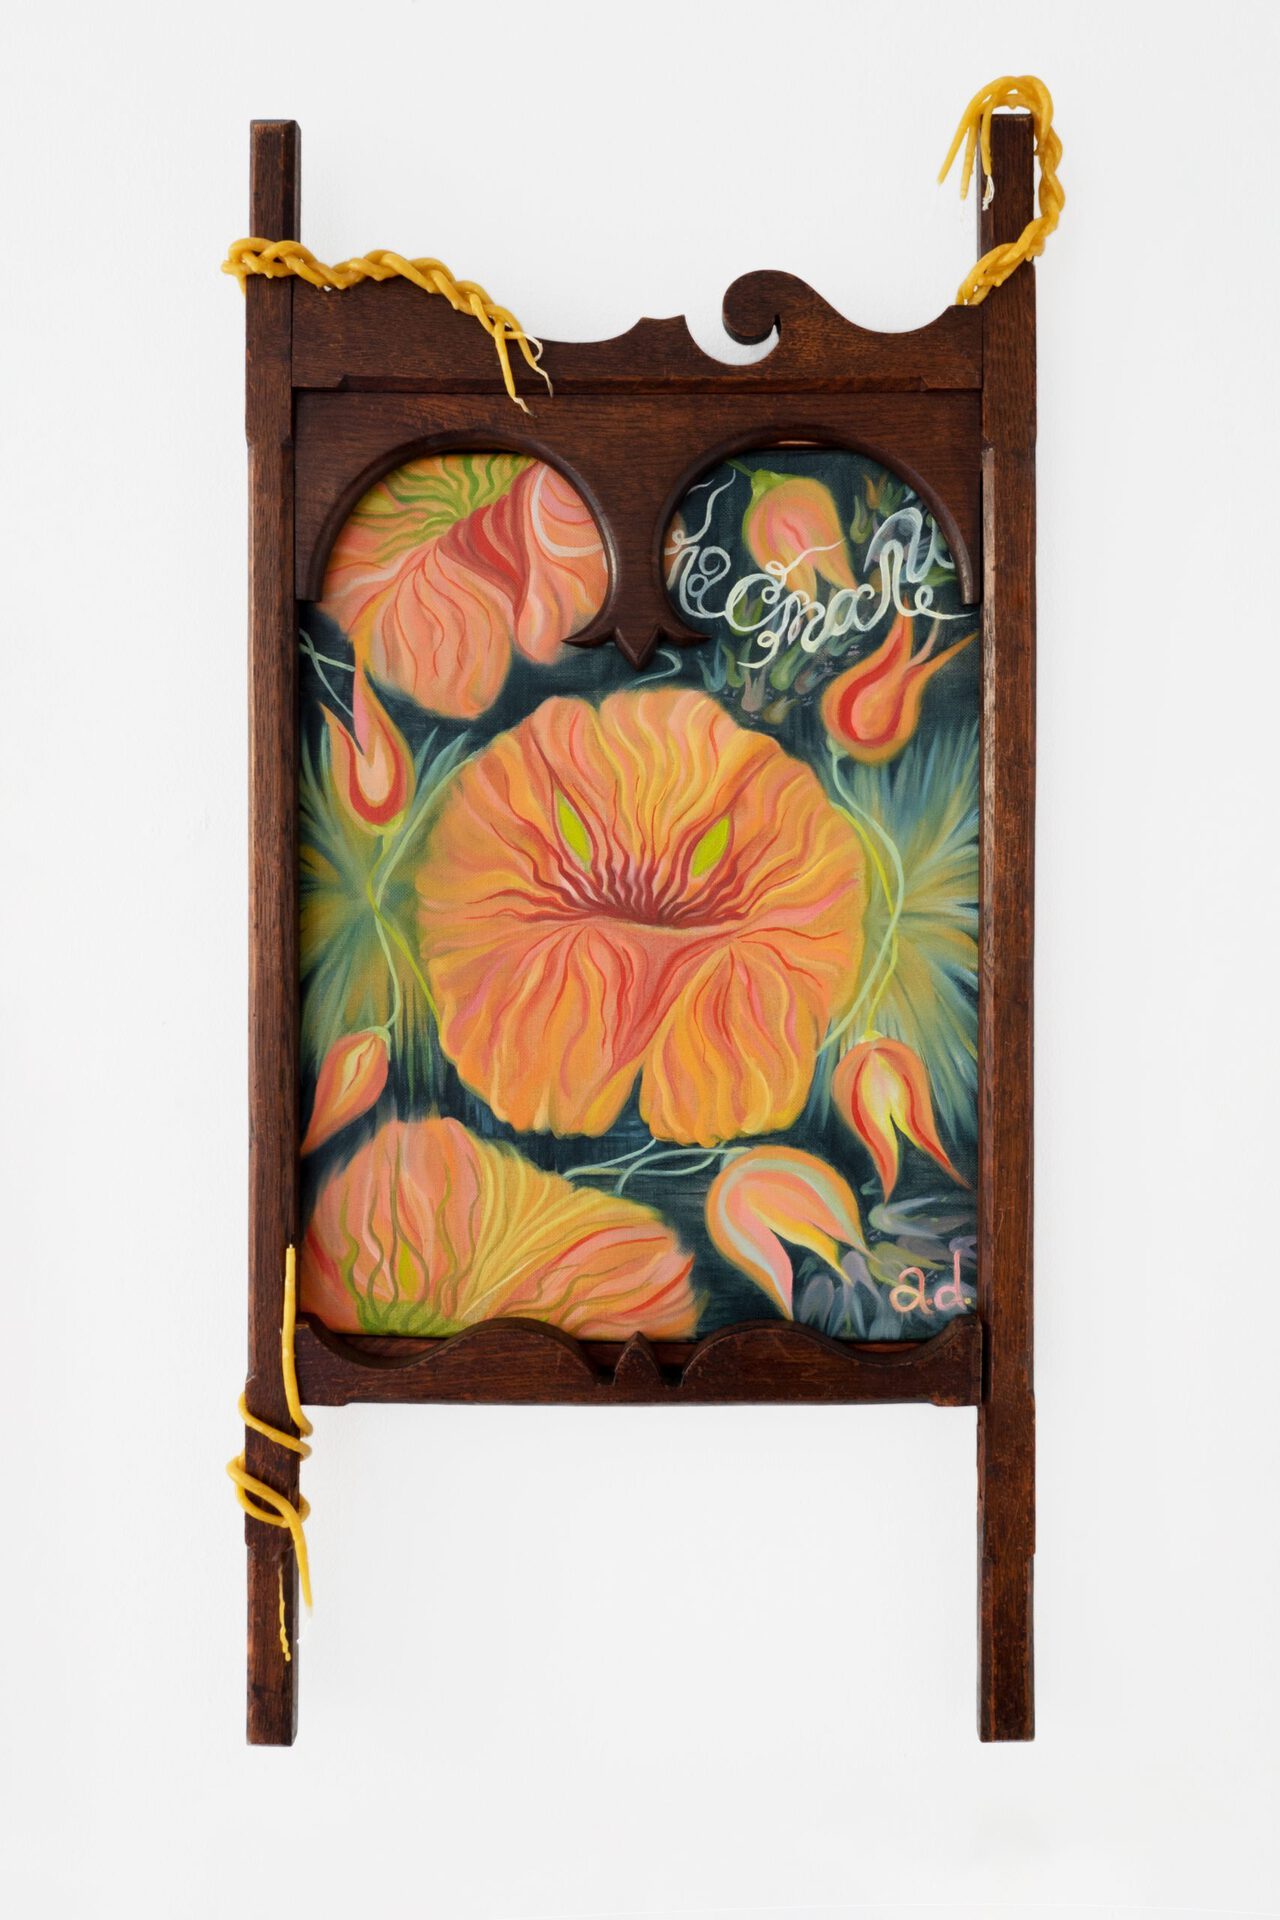 Ayla Dmyterko, Like sour oranges for breakfast, 2021, Oil on linen with found wooden frame and beeswax candles, 40 x 50 cm